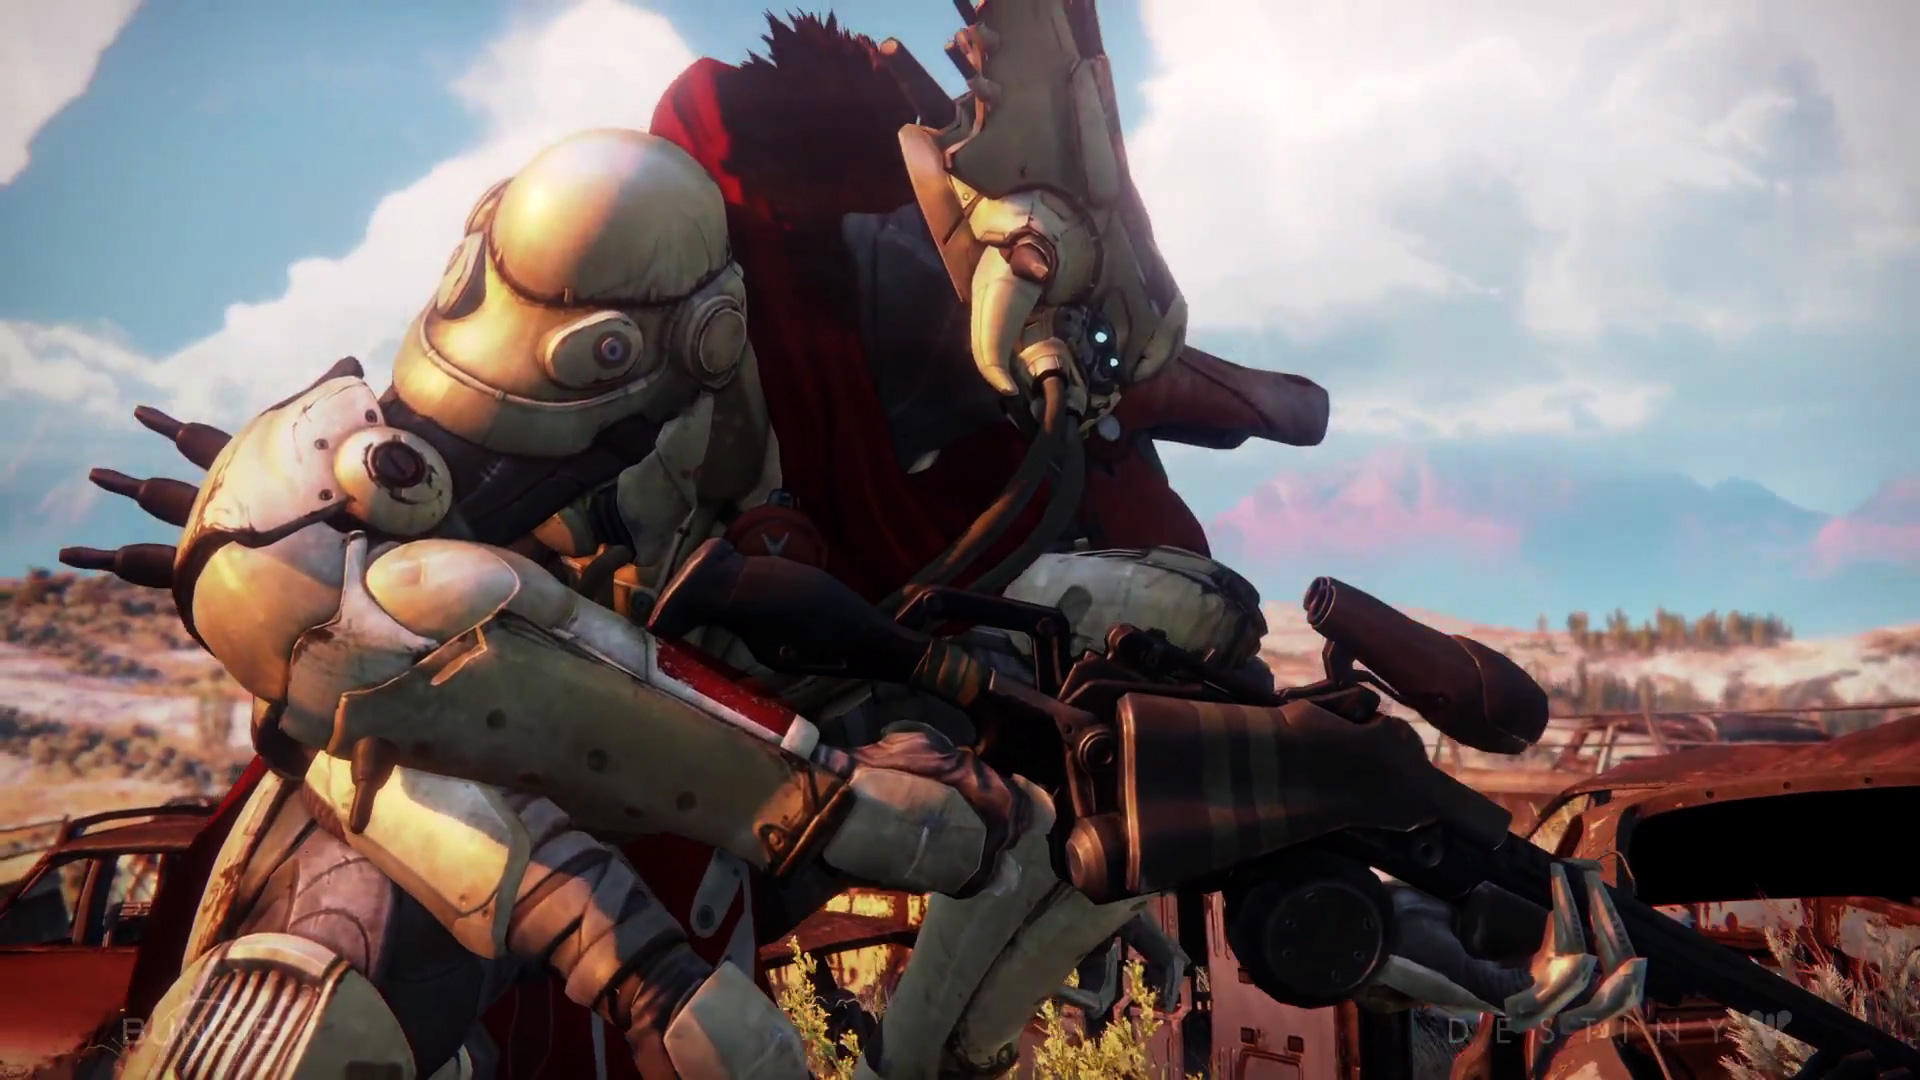 bungies-destiny-12-minutes-of-epic-gameplay-action-39.jpg